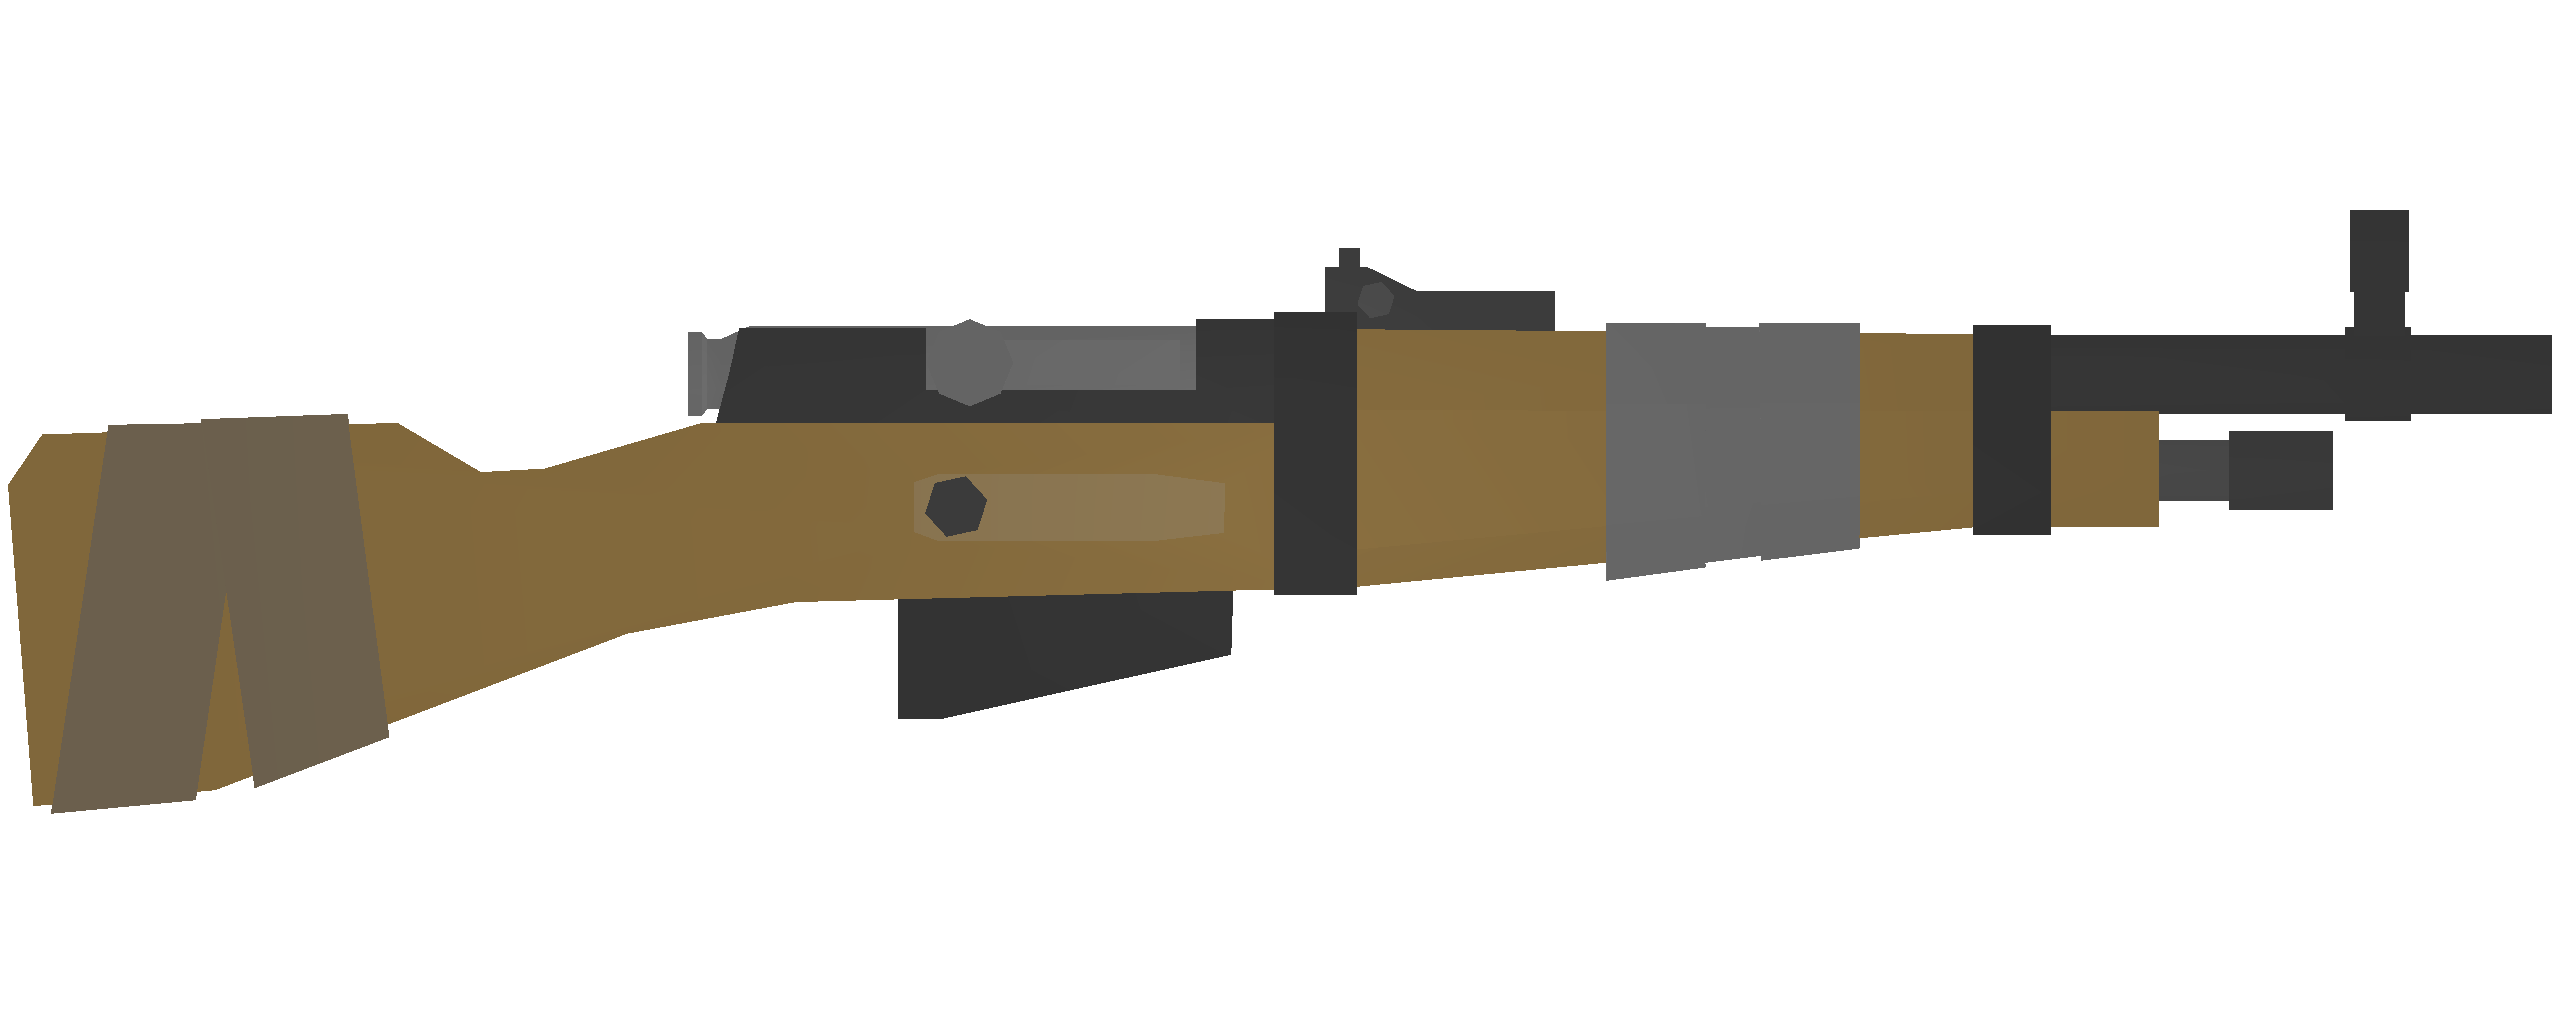 Unturned All ID lists for Magazines and Attachments - Kuwait Items Redux - Sniper Rifles - 84900C6